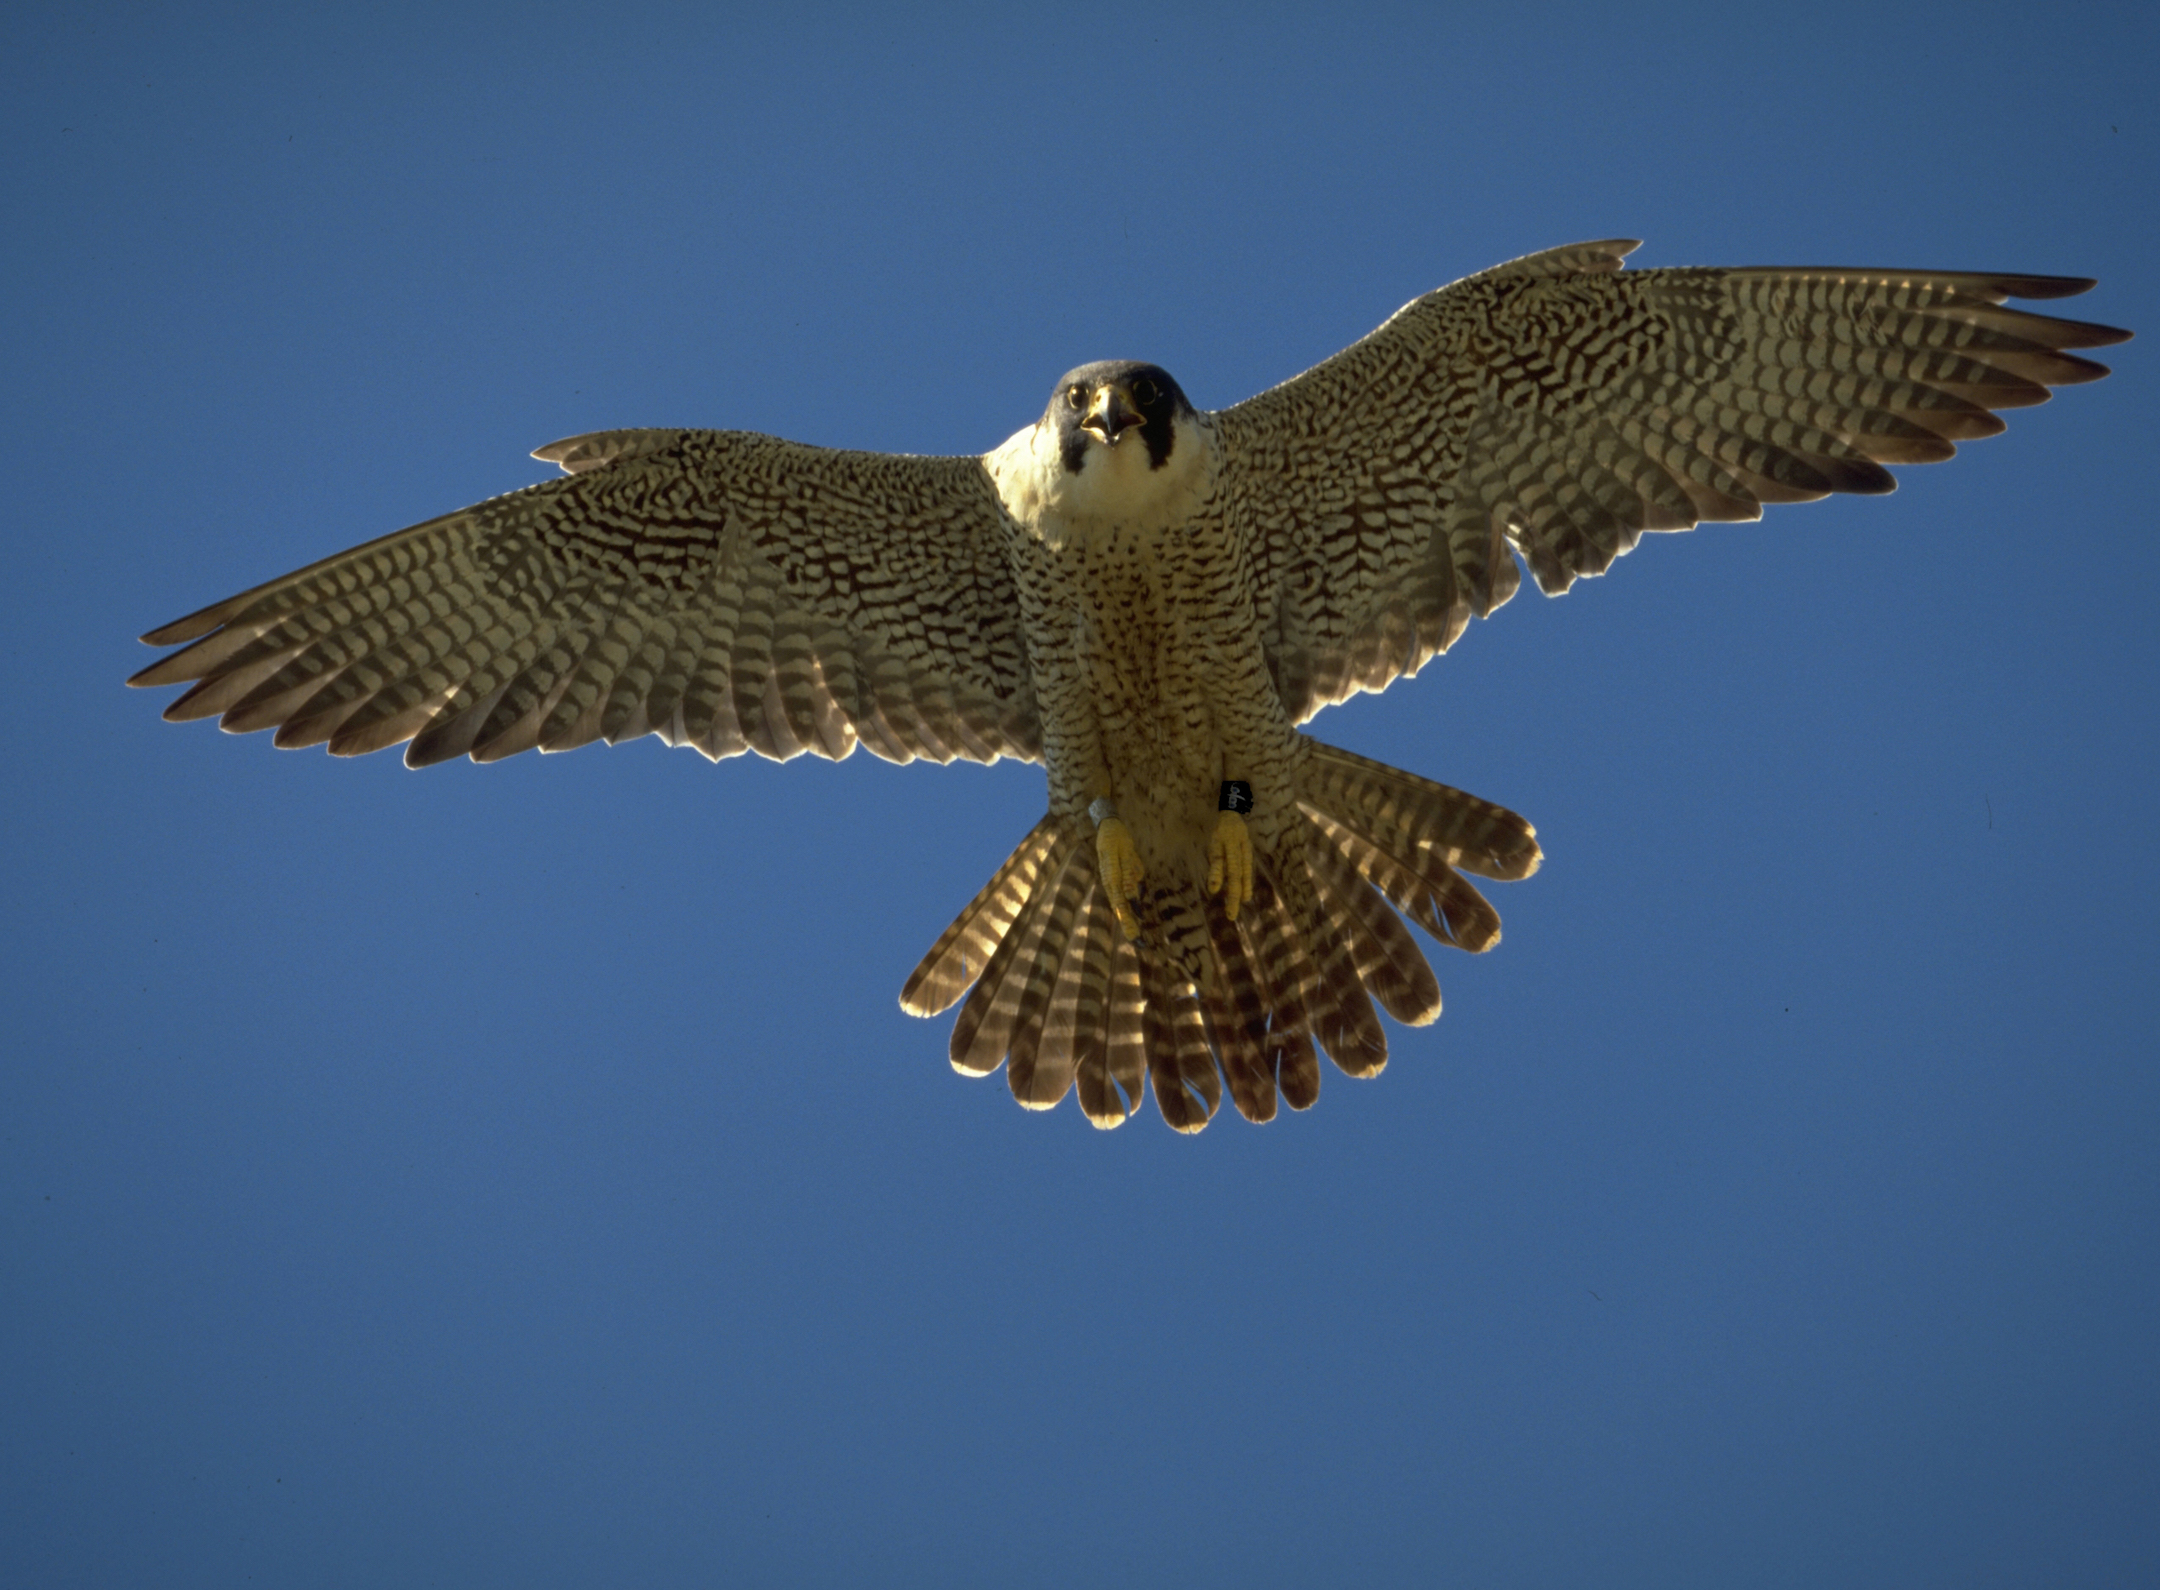 An adult peregrine falcon in flight shot from below against a blue sky.